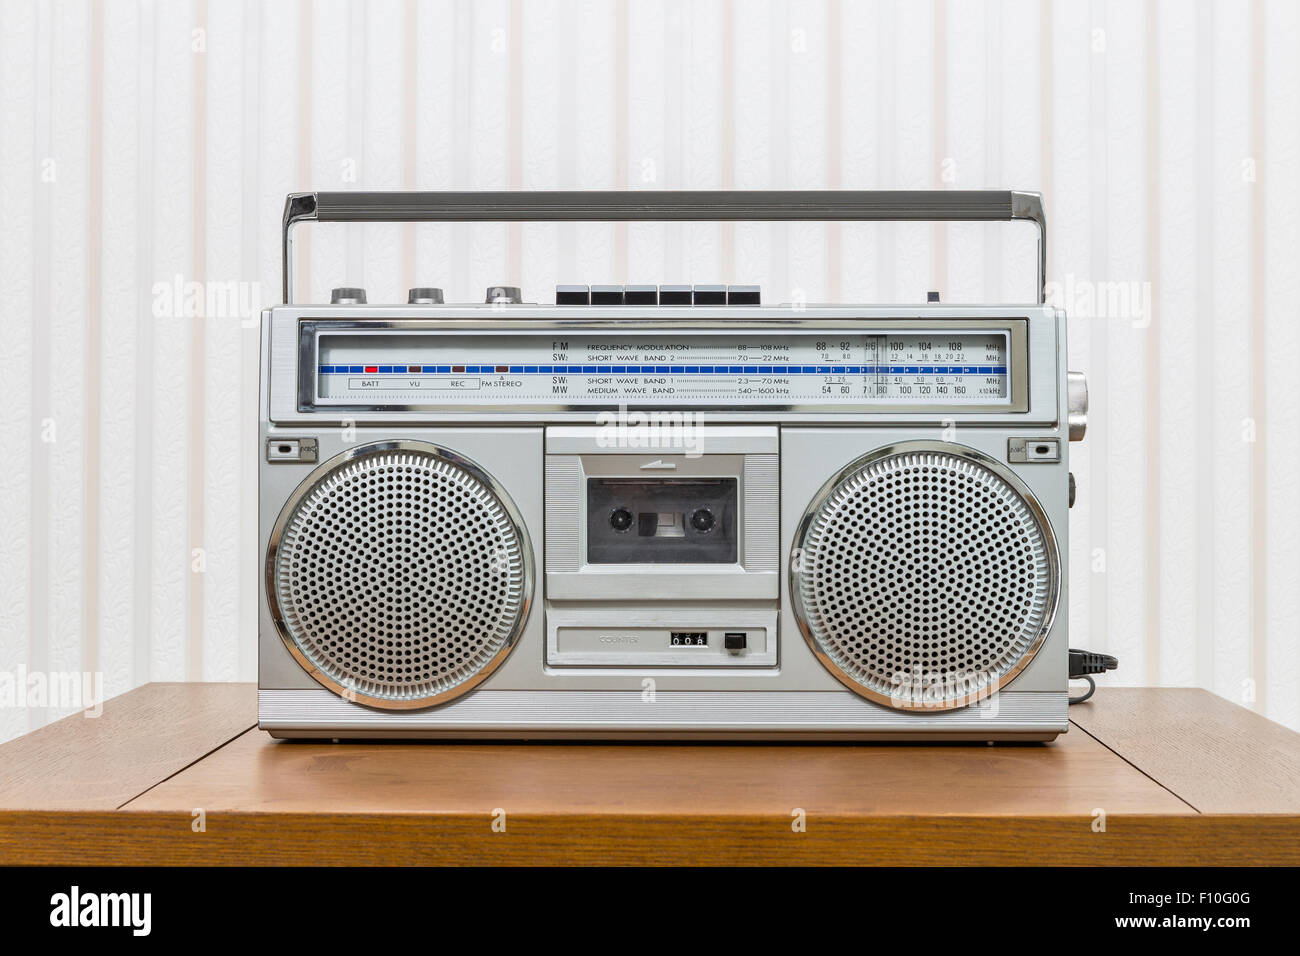 Vintage portable boom box style radio cassette player on old wood table  Stock Photo - Alamy